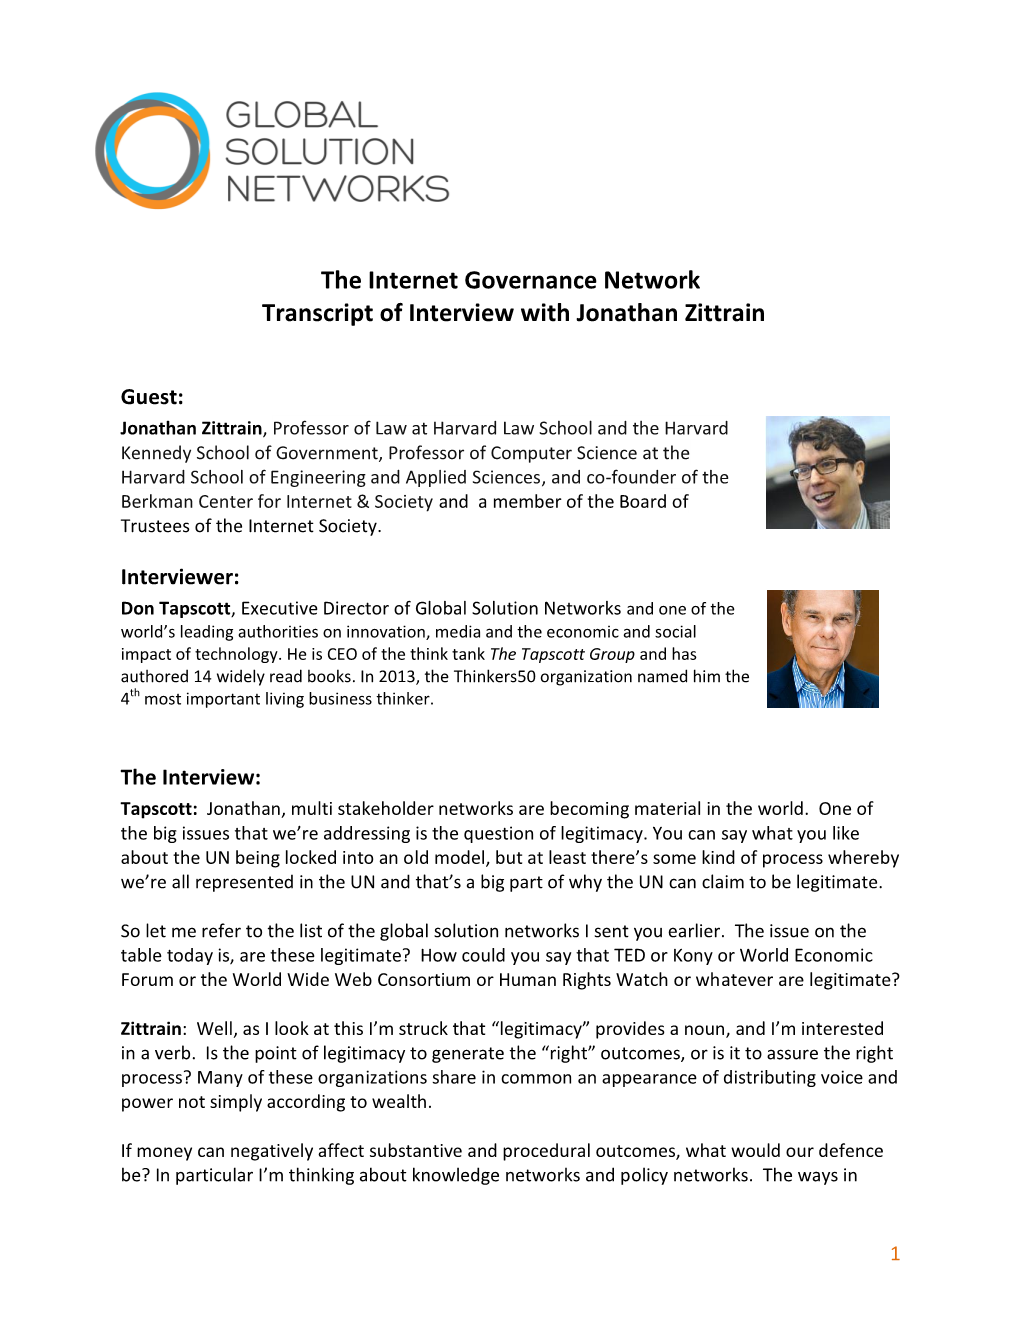 The Internet Governance Network Transcript of Interview with Jonathan Zittrain